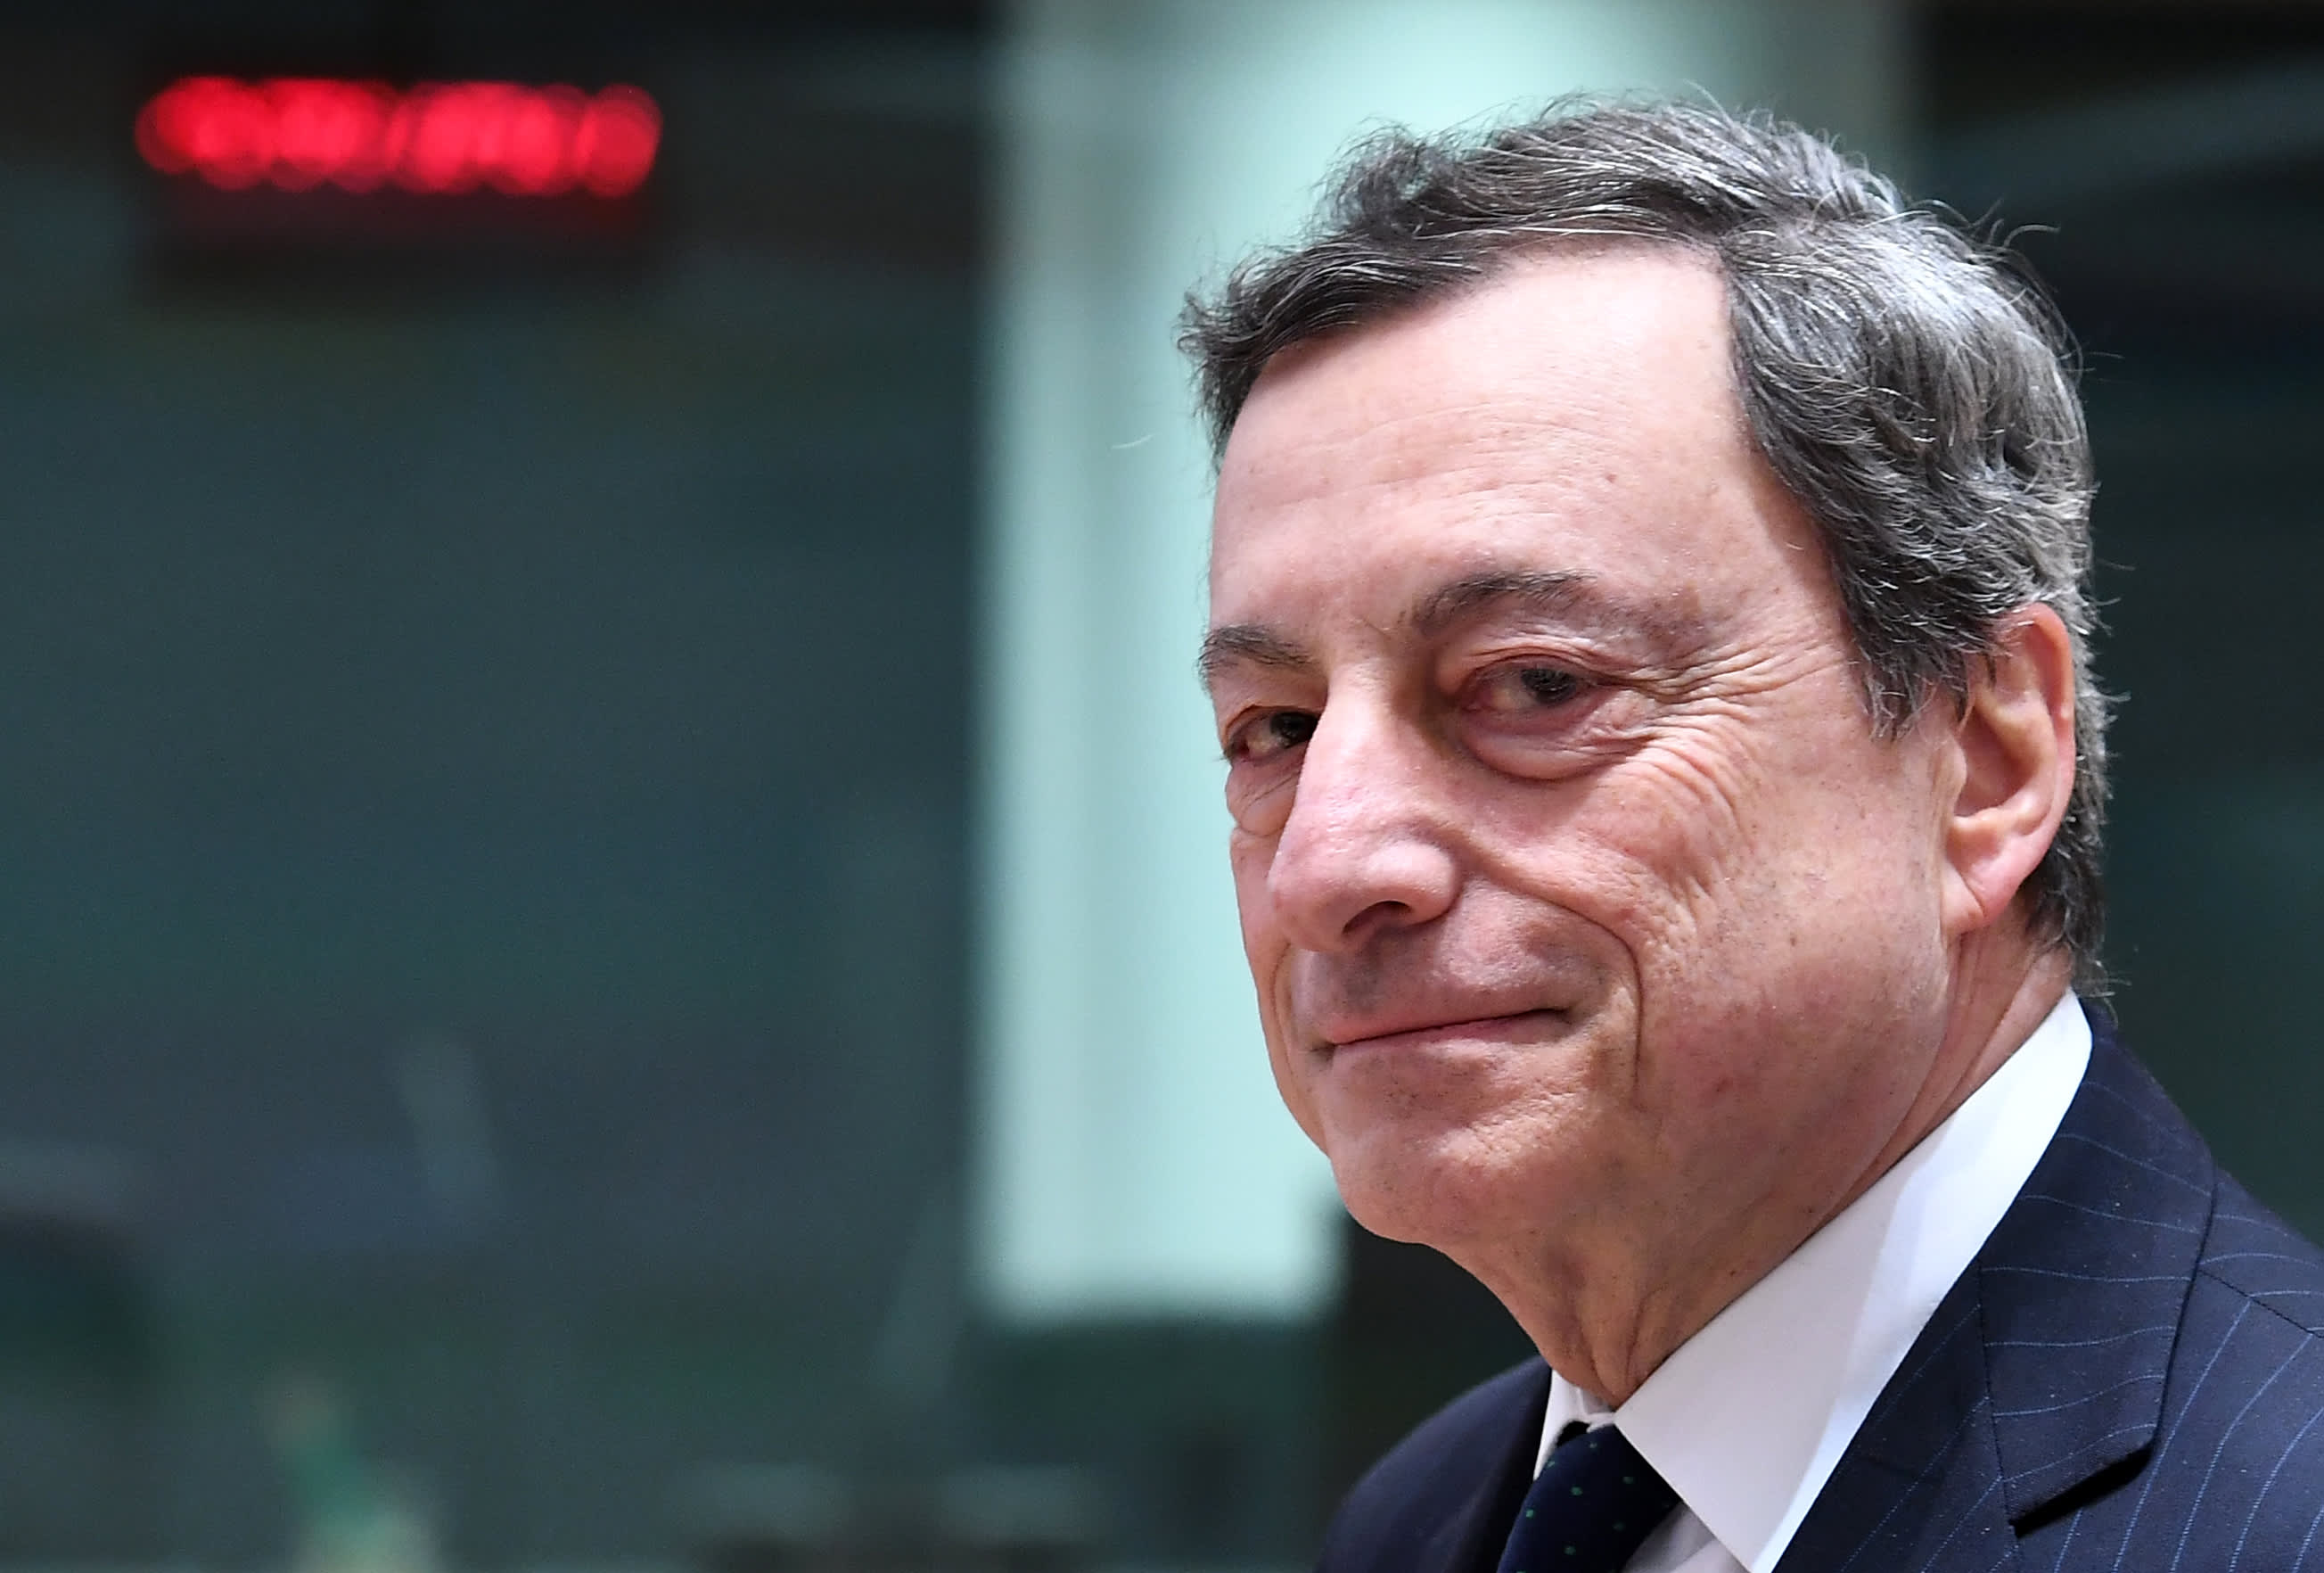 ECB says its massive bond-buying program will likely end in December